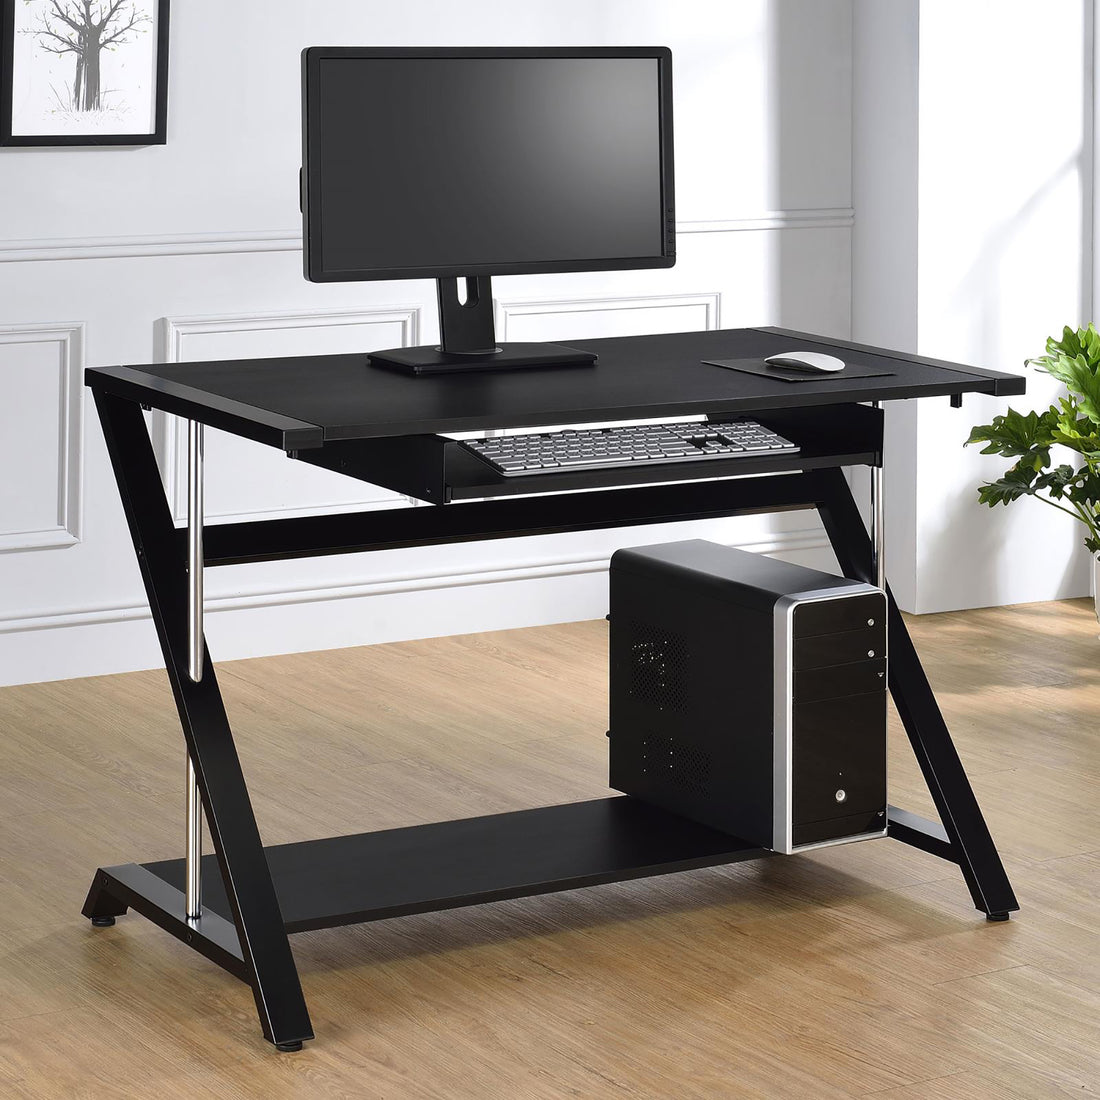 Black and Chrome Computer Desk with Keyboard Tray